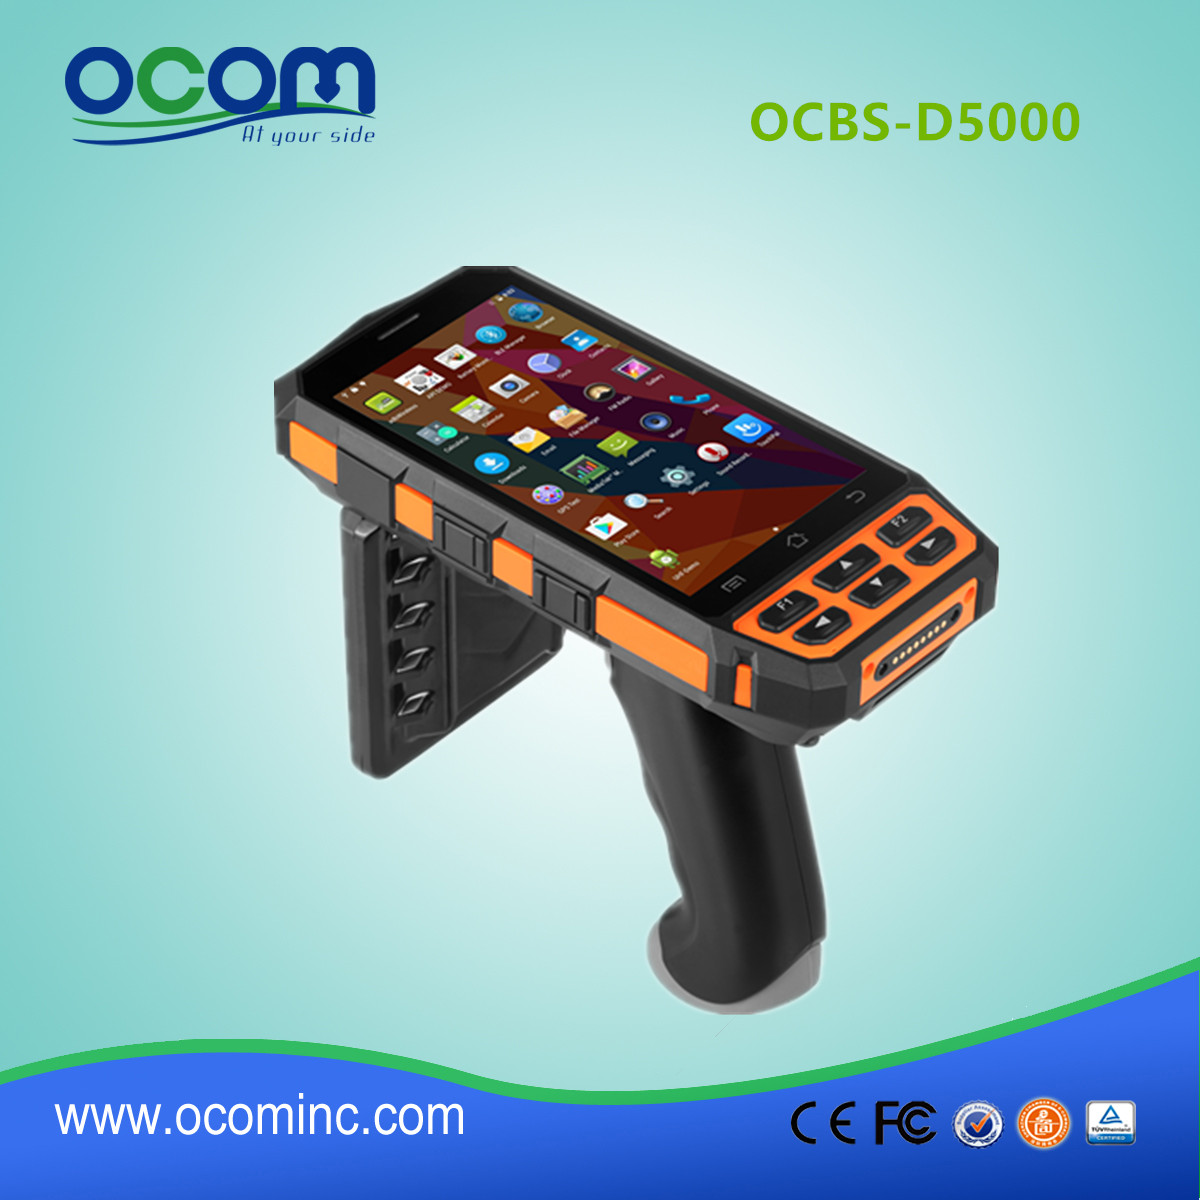 Neues Modell OCBS-D5000 Android Industrie-Handheld-Terminal